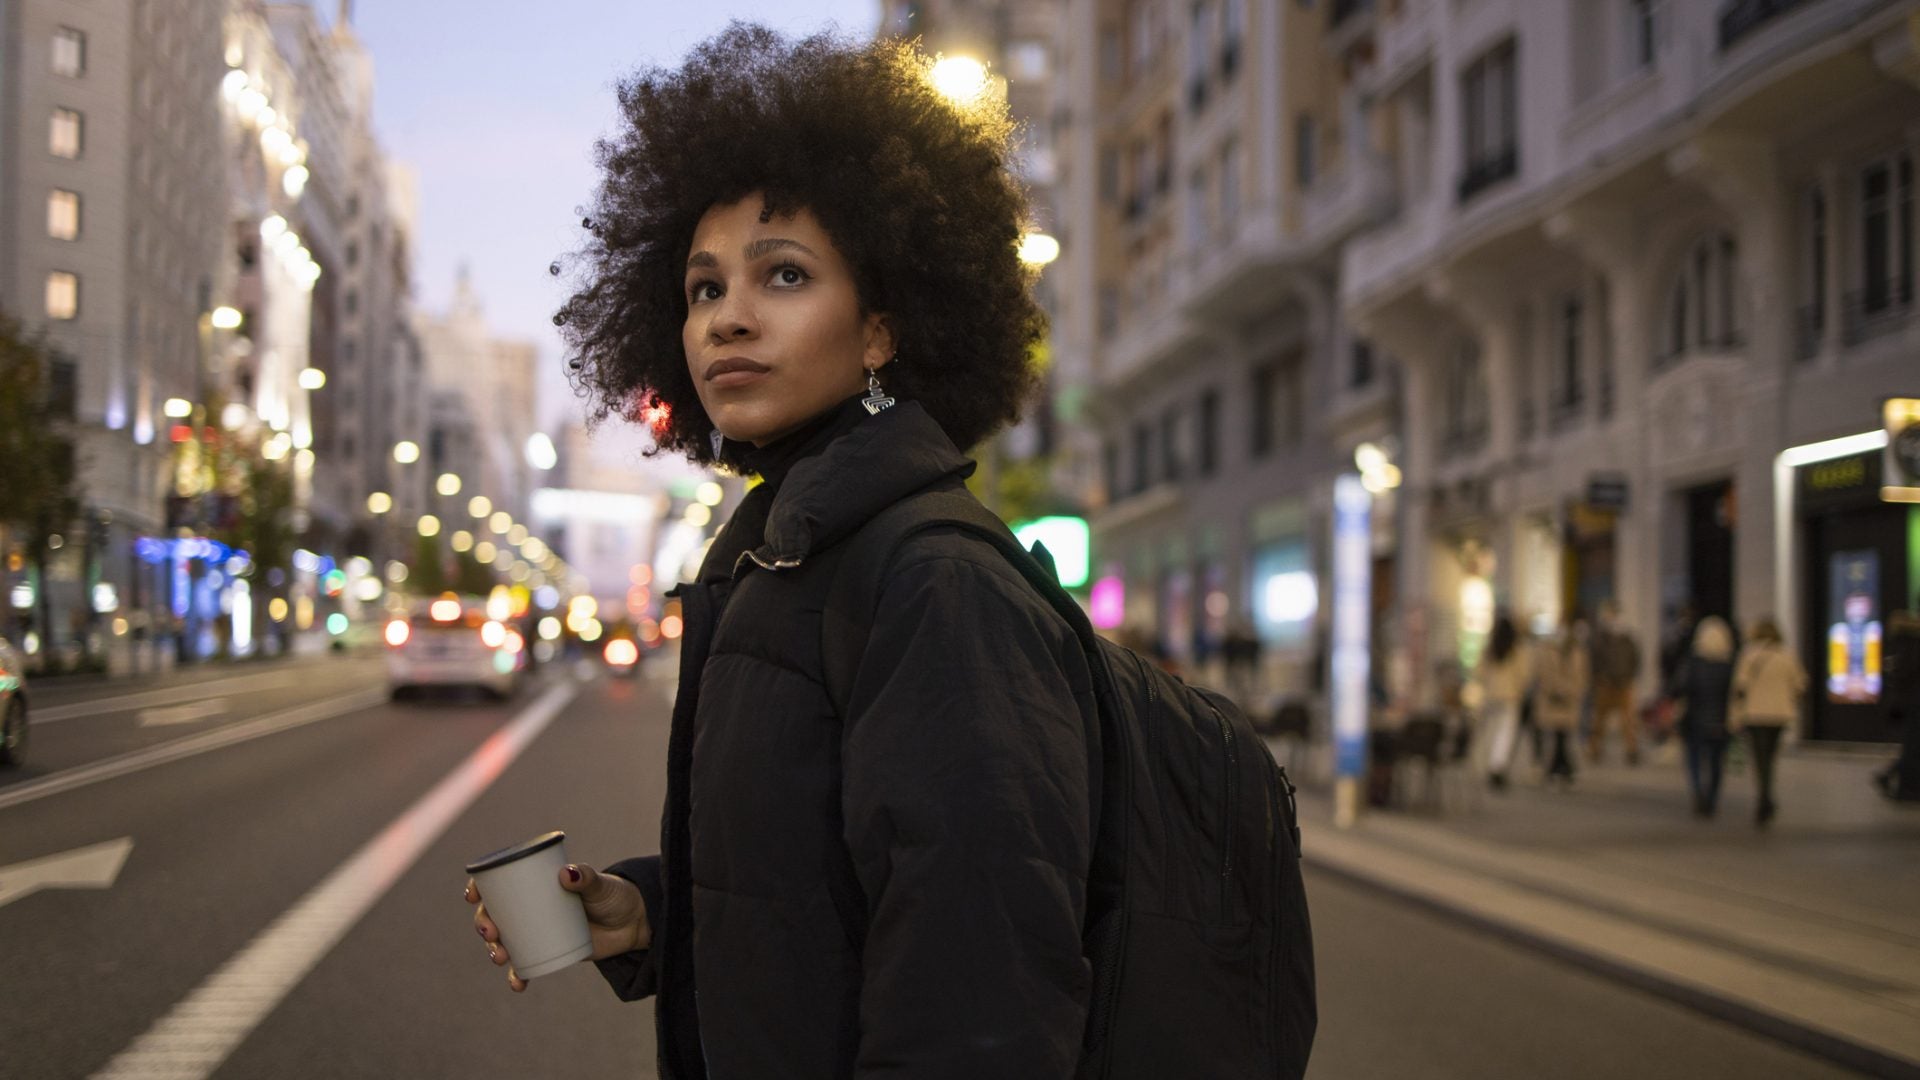 How To Protect Yourself, And Your Peace, While Traveling To Less-Than-Diverse Destinations